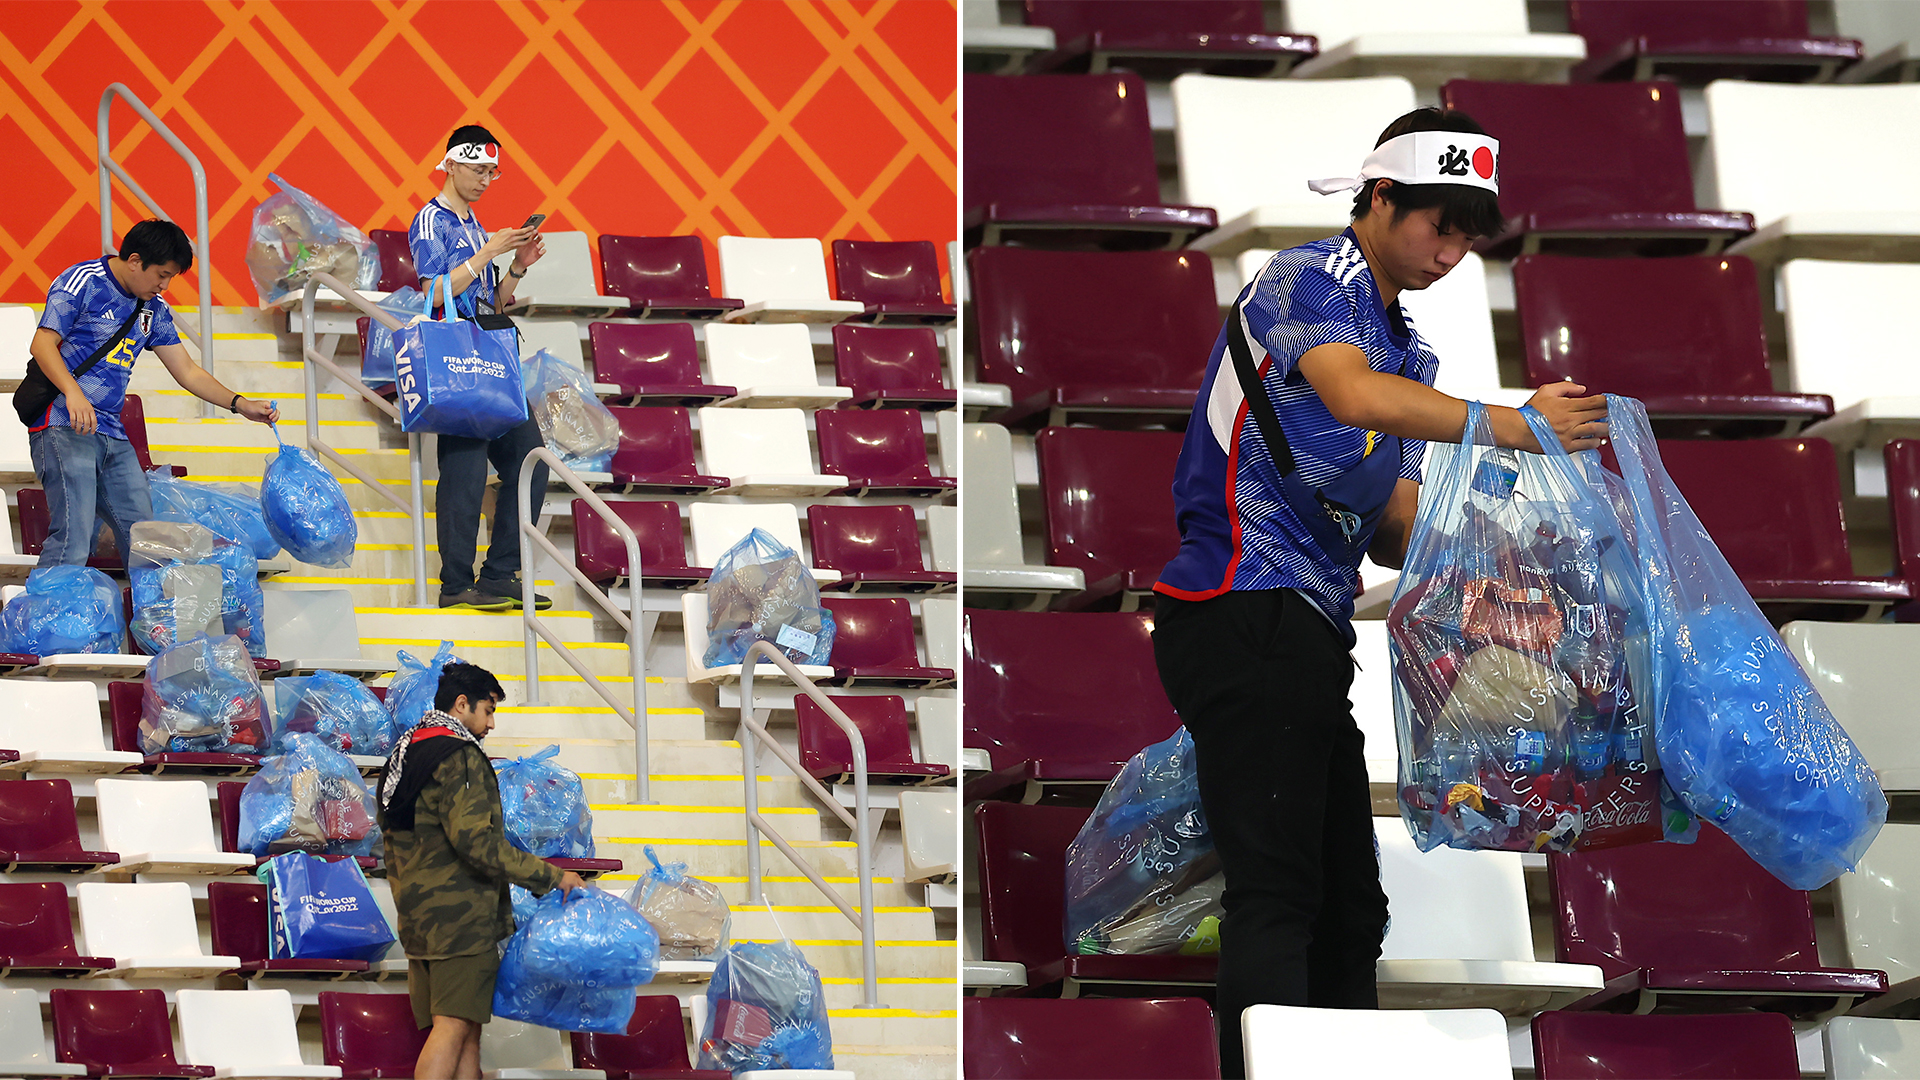 Japanese fans cleaning the stands of the stadium after the match between their team and Germany.  The carbon footprint left by this World Cup is unprecedented.  (FIFA World Cup Qatar 2022)